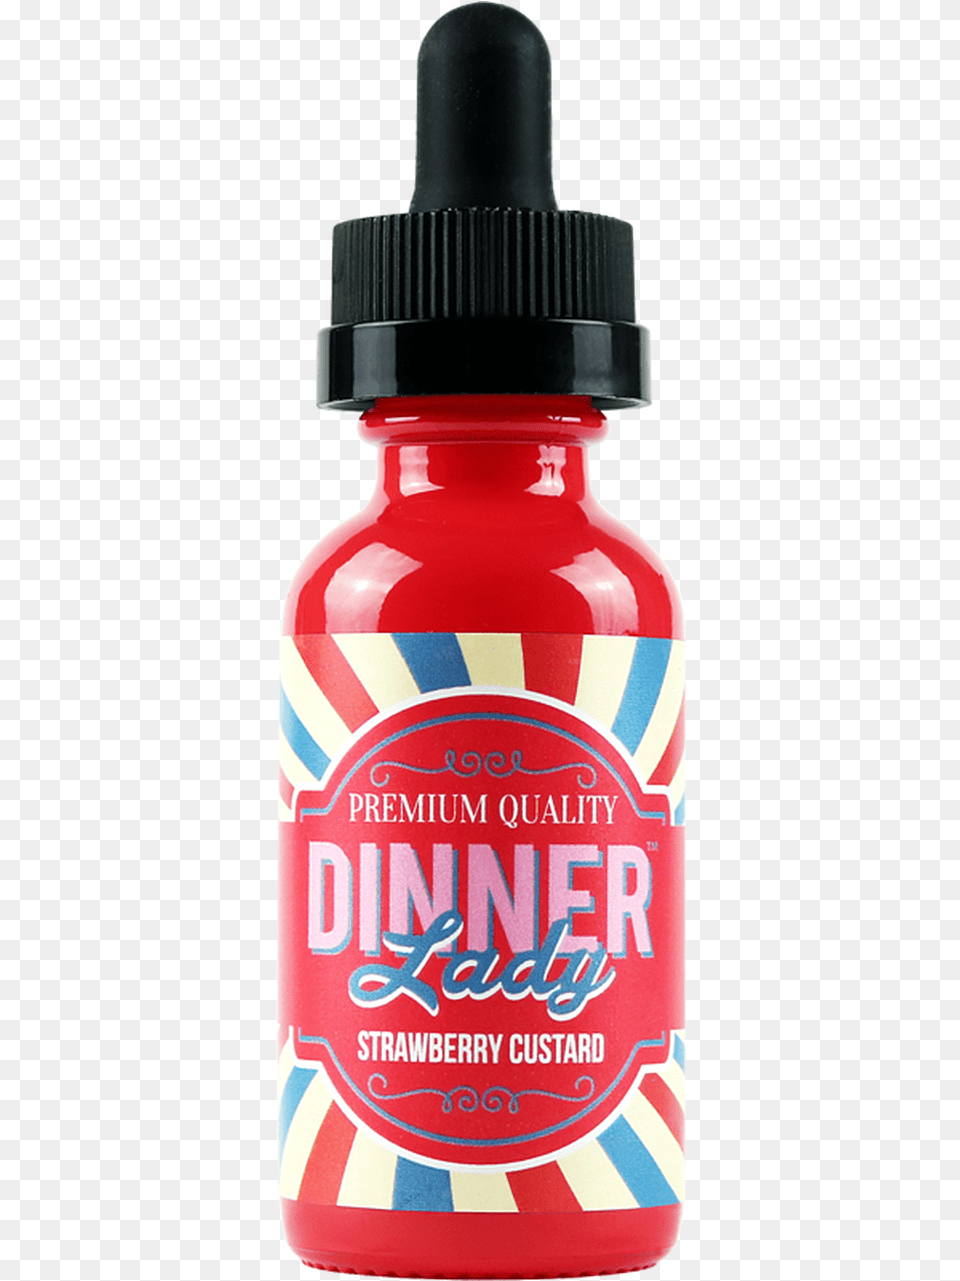 Strawberry Custard E Juice 60ml By Dinner Lady Dinner Lady Strawberry Macaron, Bottle, Ink Bottle, Alcohol, Beer Free Png Download